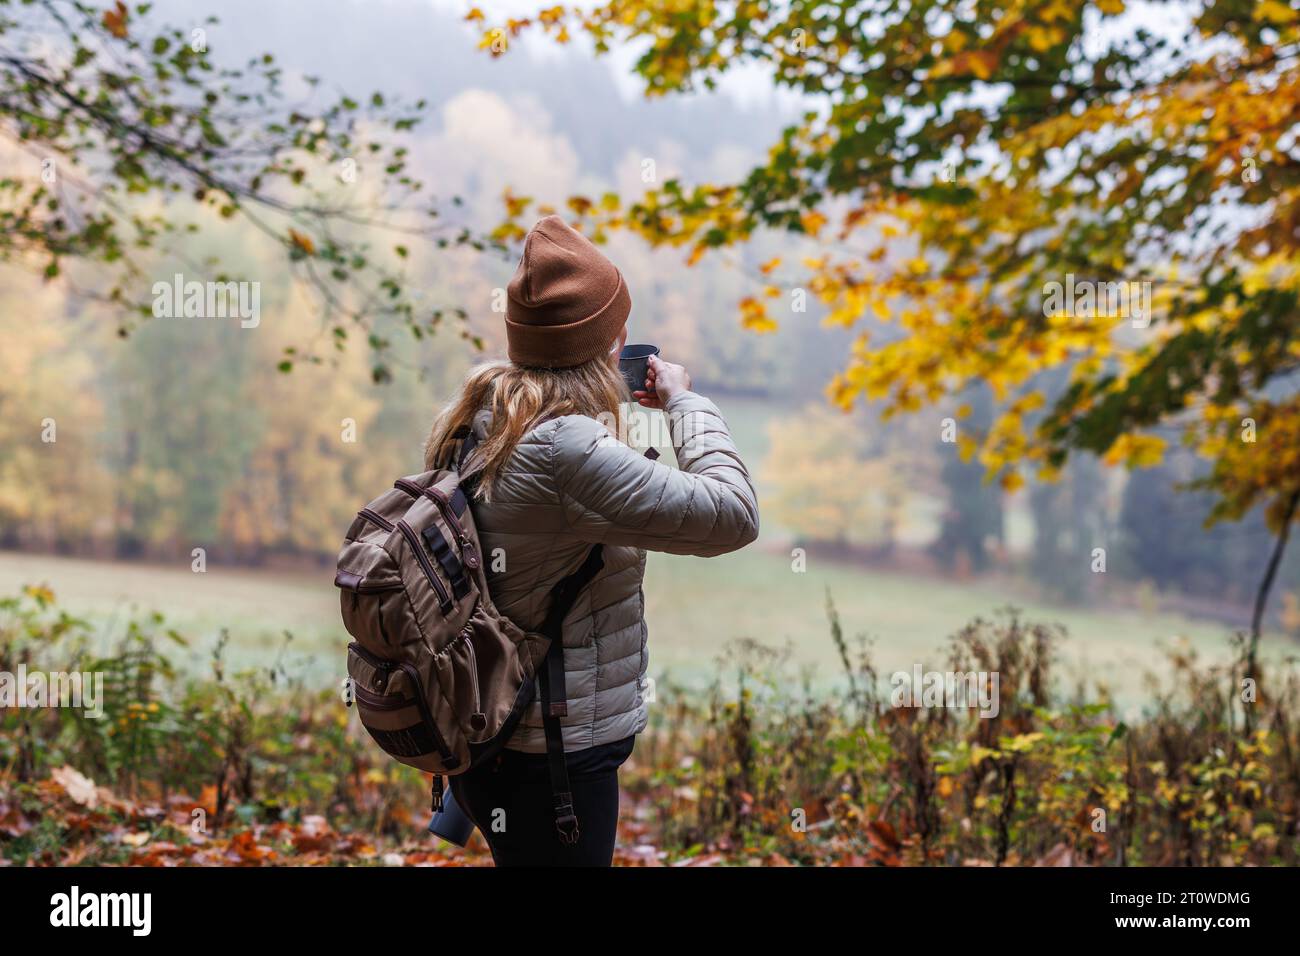 Refreshment during hike in autumn forest. Woman drinking hot drink while resting outdoors Stock Photo